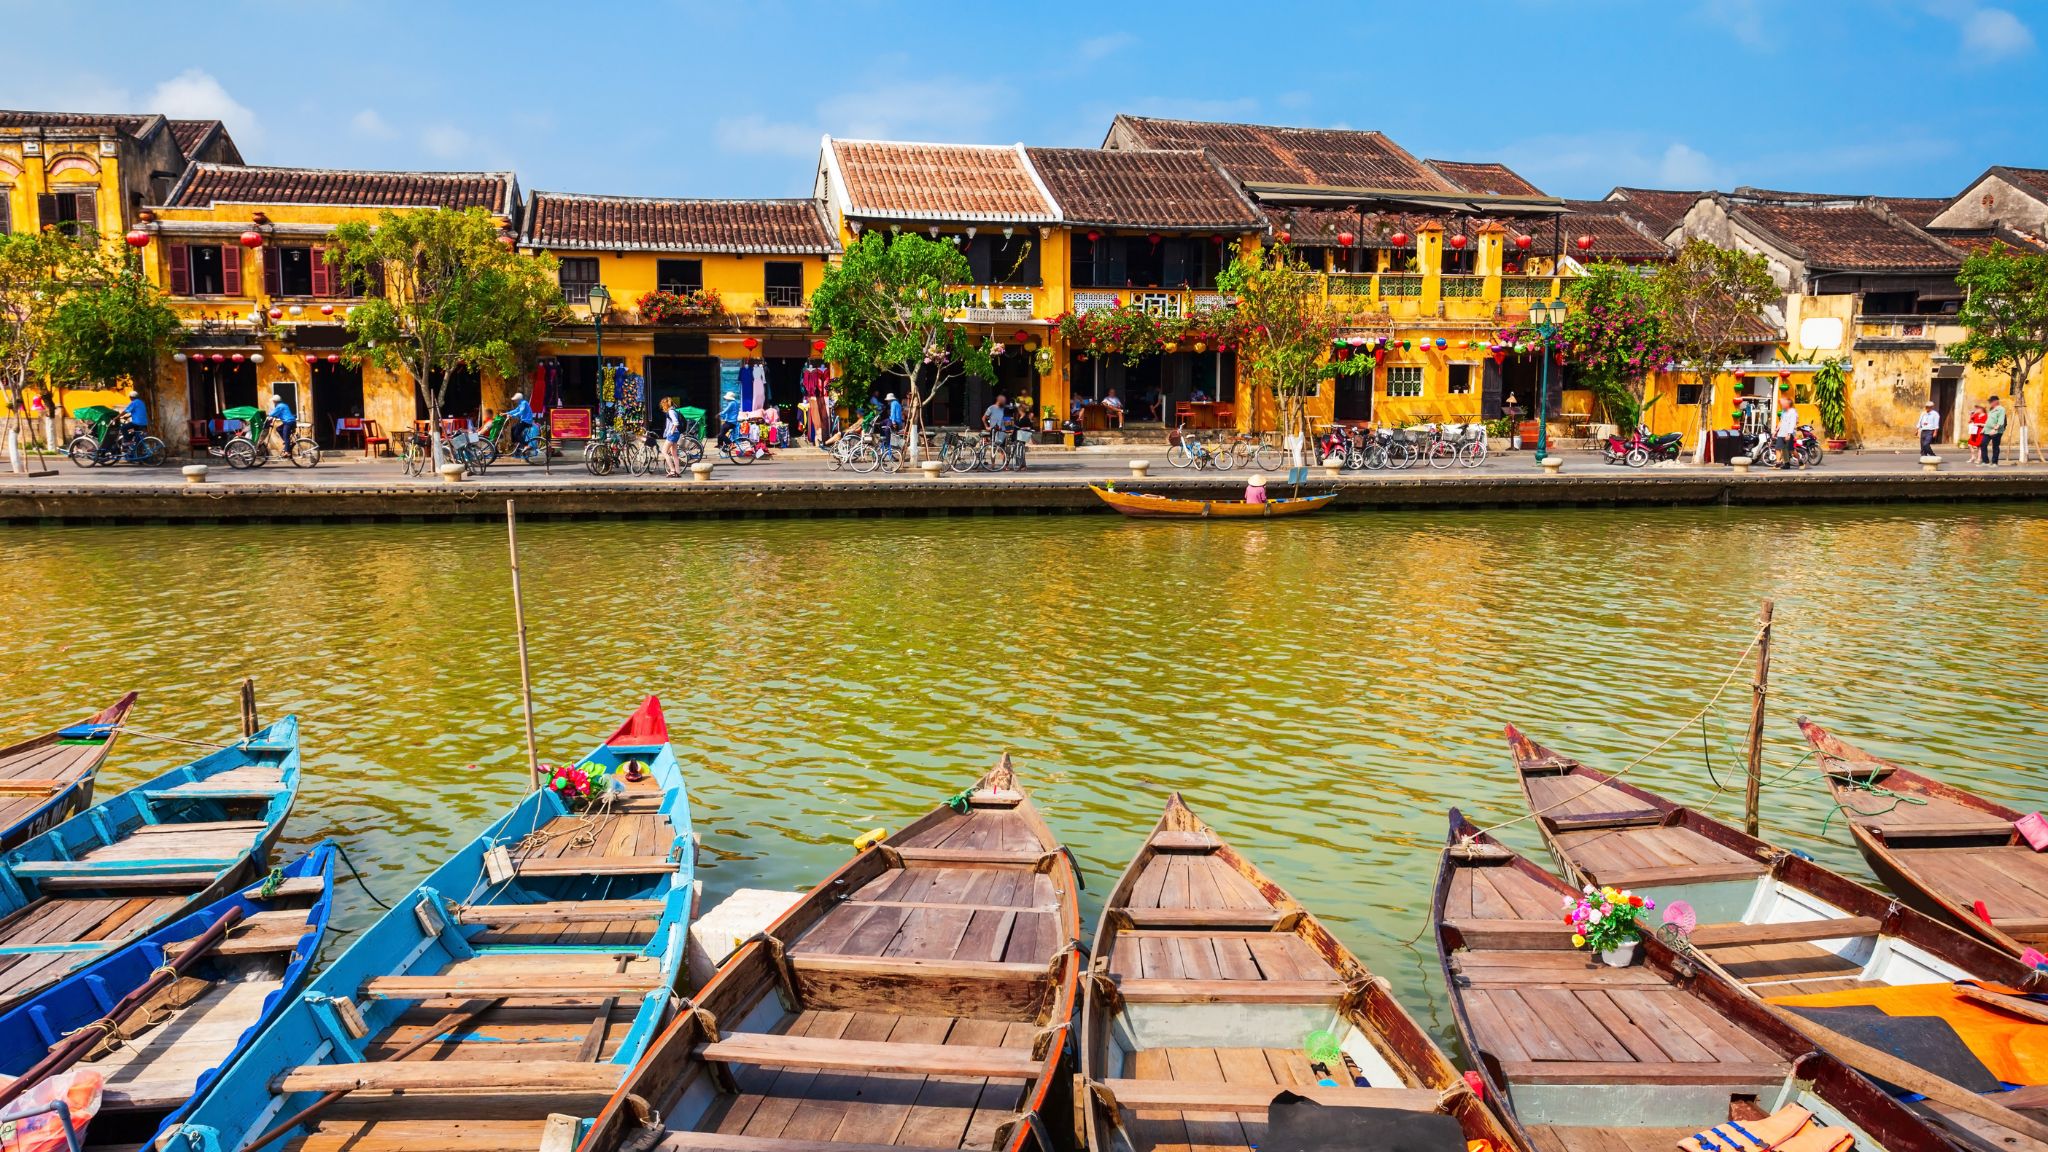 Day 7 Hoi An Ancient Town Sits Serenely By The Thu Bon River